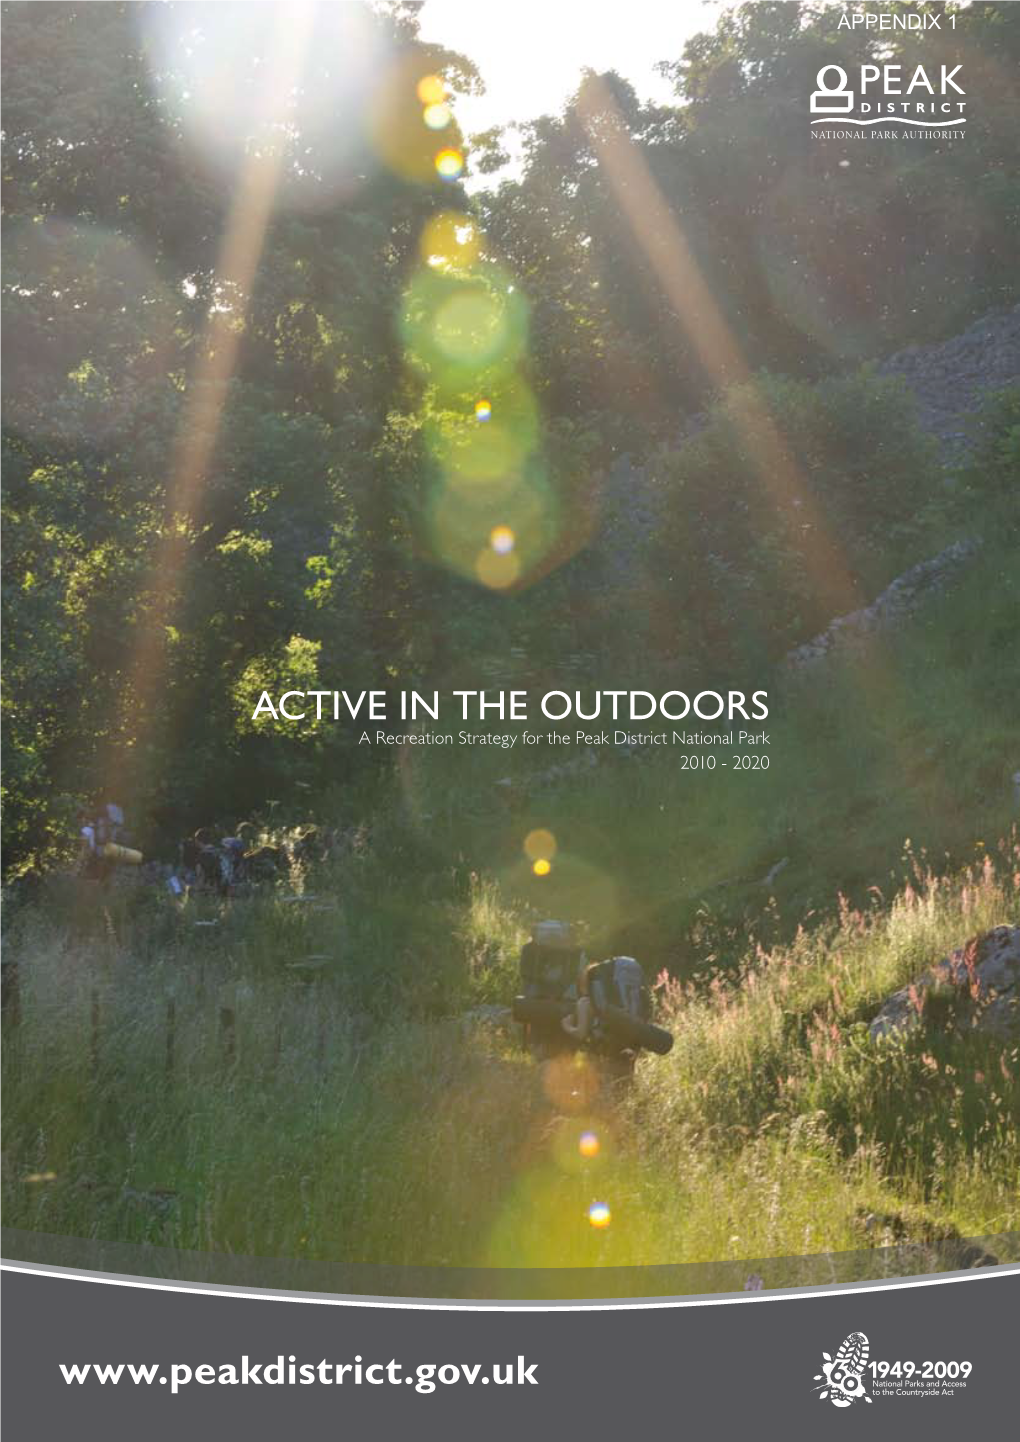 ACTIVE in the OUTDOORS a Recreation Strategy for the Peak District National Park 2010 - 2020